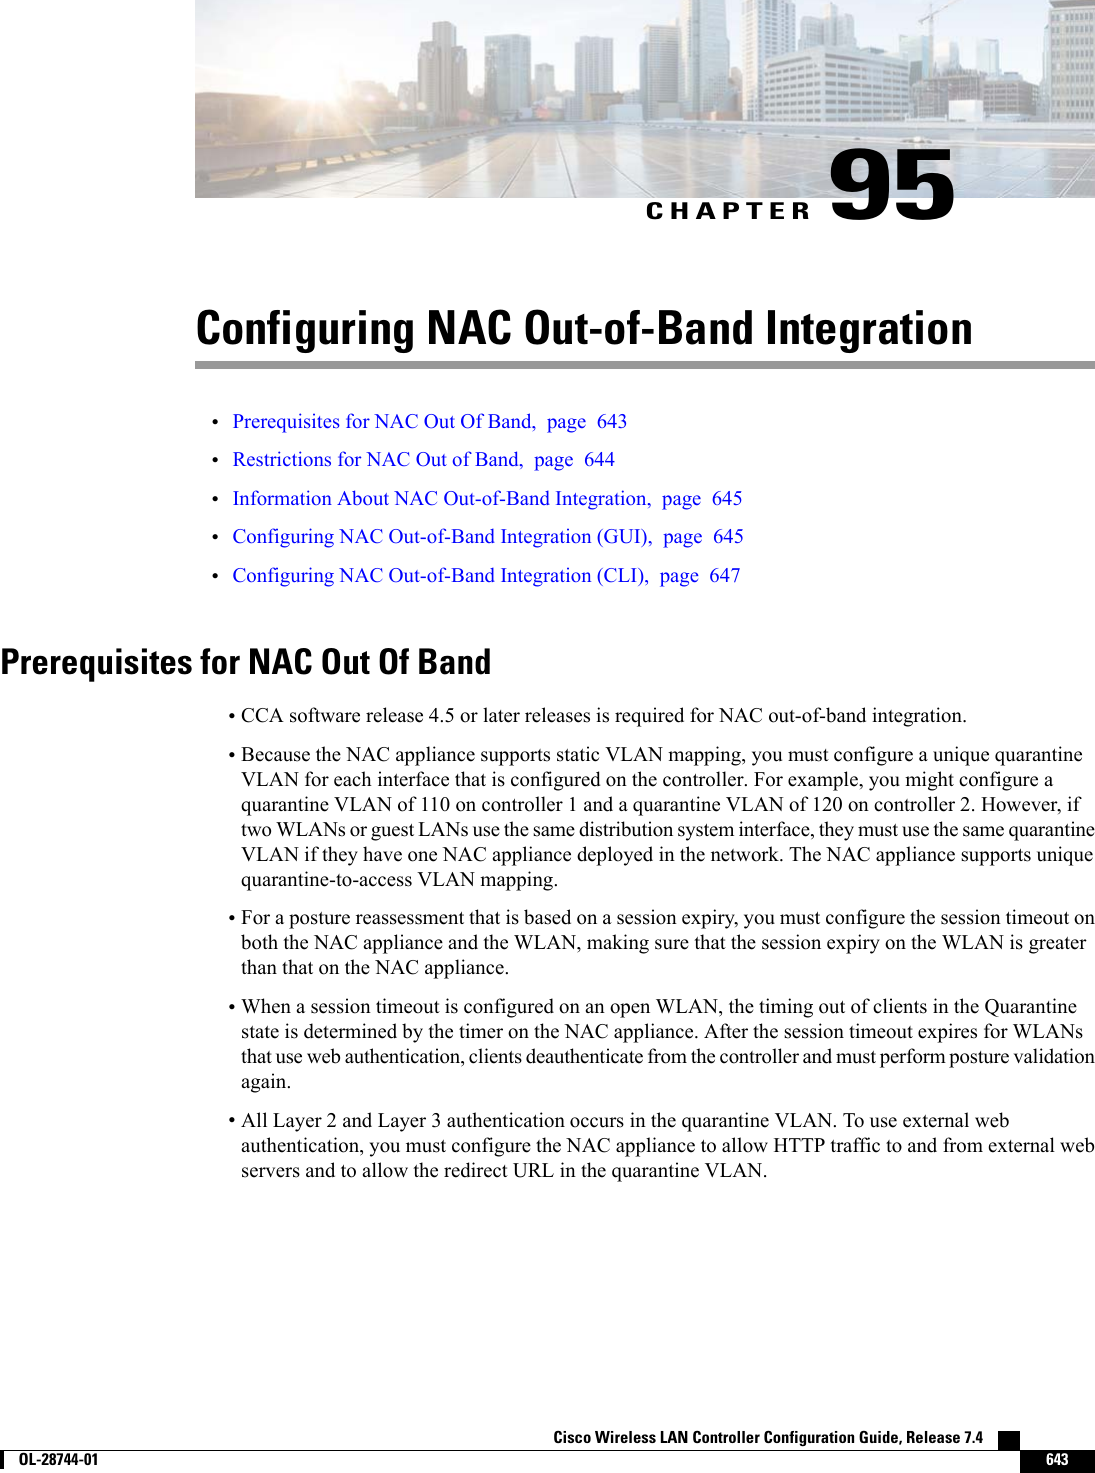 CHAPTER 95Configuring NAC Out-of-Band Integration•Prerequisites for NAC Out Of Band, page 643•Restrictions for NAC Out of Band, page 644•Information About NAC Out-of-Band Integration, page 645•Configuring NAC Out-of-Band Integration (GUI), page 645•Configuring NAC Out-of-Band Integration (CLI), page 647Prerequisites for NAC Out Of Band•CCA software release 4.5 or later releases is required for NAC out-of-band integration.•Because the NAC appliance supports static VLAN mapping, you must configure a unique quarantineVLAN for each interface that is configured on the controller. For example, you might configure aquarantine VLAN of 110 on controller 1 and a quarantine VLAN of 120 on controller 2. However, iftwo WLANs or guest LANs use the same distribution system interface, they must use the same quarantineVLAN if they have one NAC appliance deployed in the network. The NAC appliance supports uniquequarantine-to-access VLAN mapping.•For a posture reassessment that is based on a session expiry, you must configure the session timeout onboth the NAC appliance and the WLAN, making sure that the session expiry on the WLAN is greaterthan that on the NAC appliance.•When a session timeout is configured on an open WLAN, the timing out of clients in the Quarantinestate is determined by the timer on the NAC appliance. After the session timeout expires for WLANsthat use web authentication, clients deauthenticate from the controller and must perform posture validationagain.•All Layer 2 and Layer 3 authentication occurs in the quarantine VLAN. To use external webauthentication, you must configure the NAC appliance to allow HTTP traffic to and from external webservers and to allow the redirect URL in the quarantine VLAN.Cisco Wireless LAN Controller Configuration Guide, Release 7.4        OL-28744-01 643